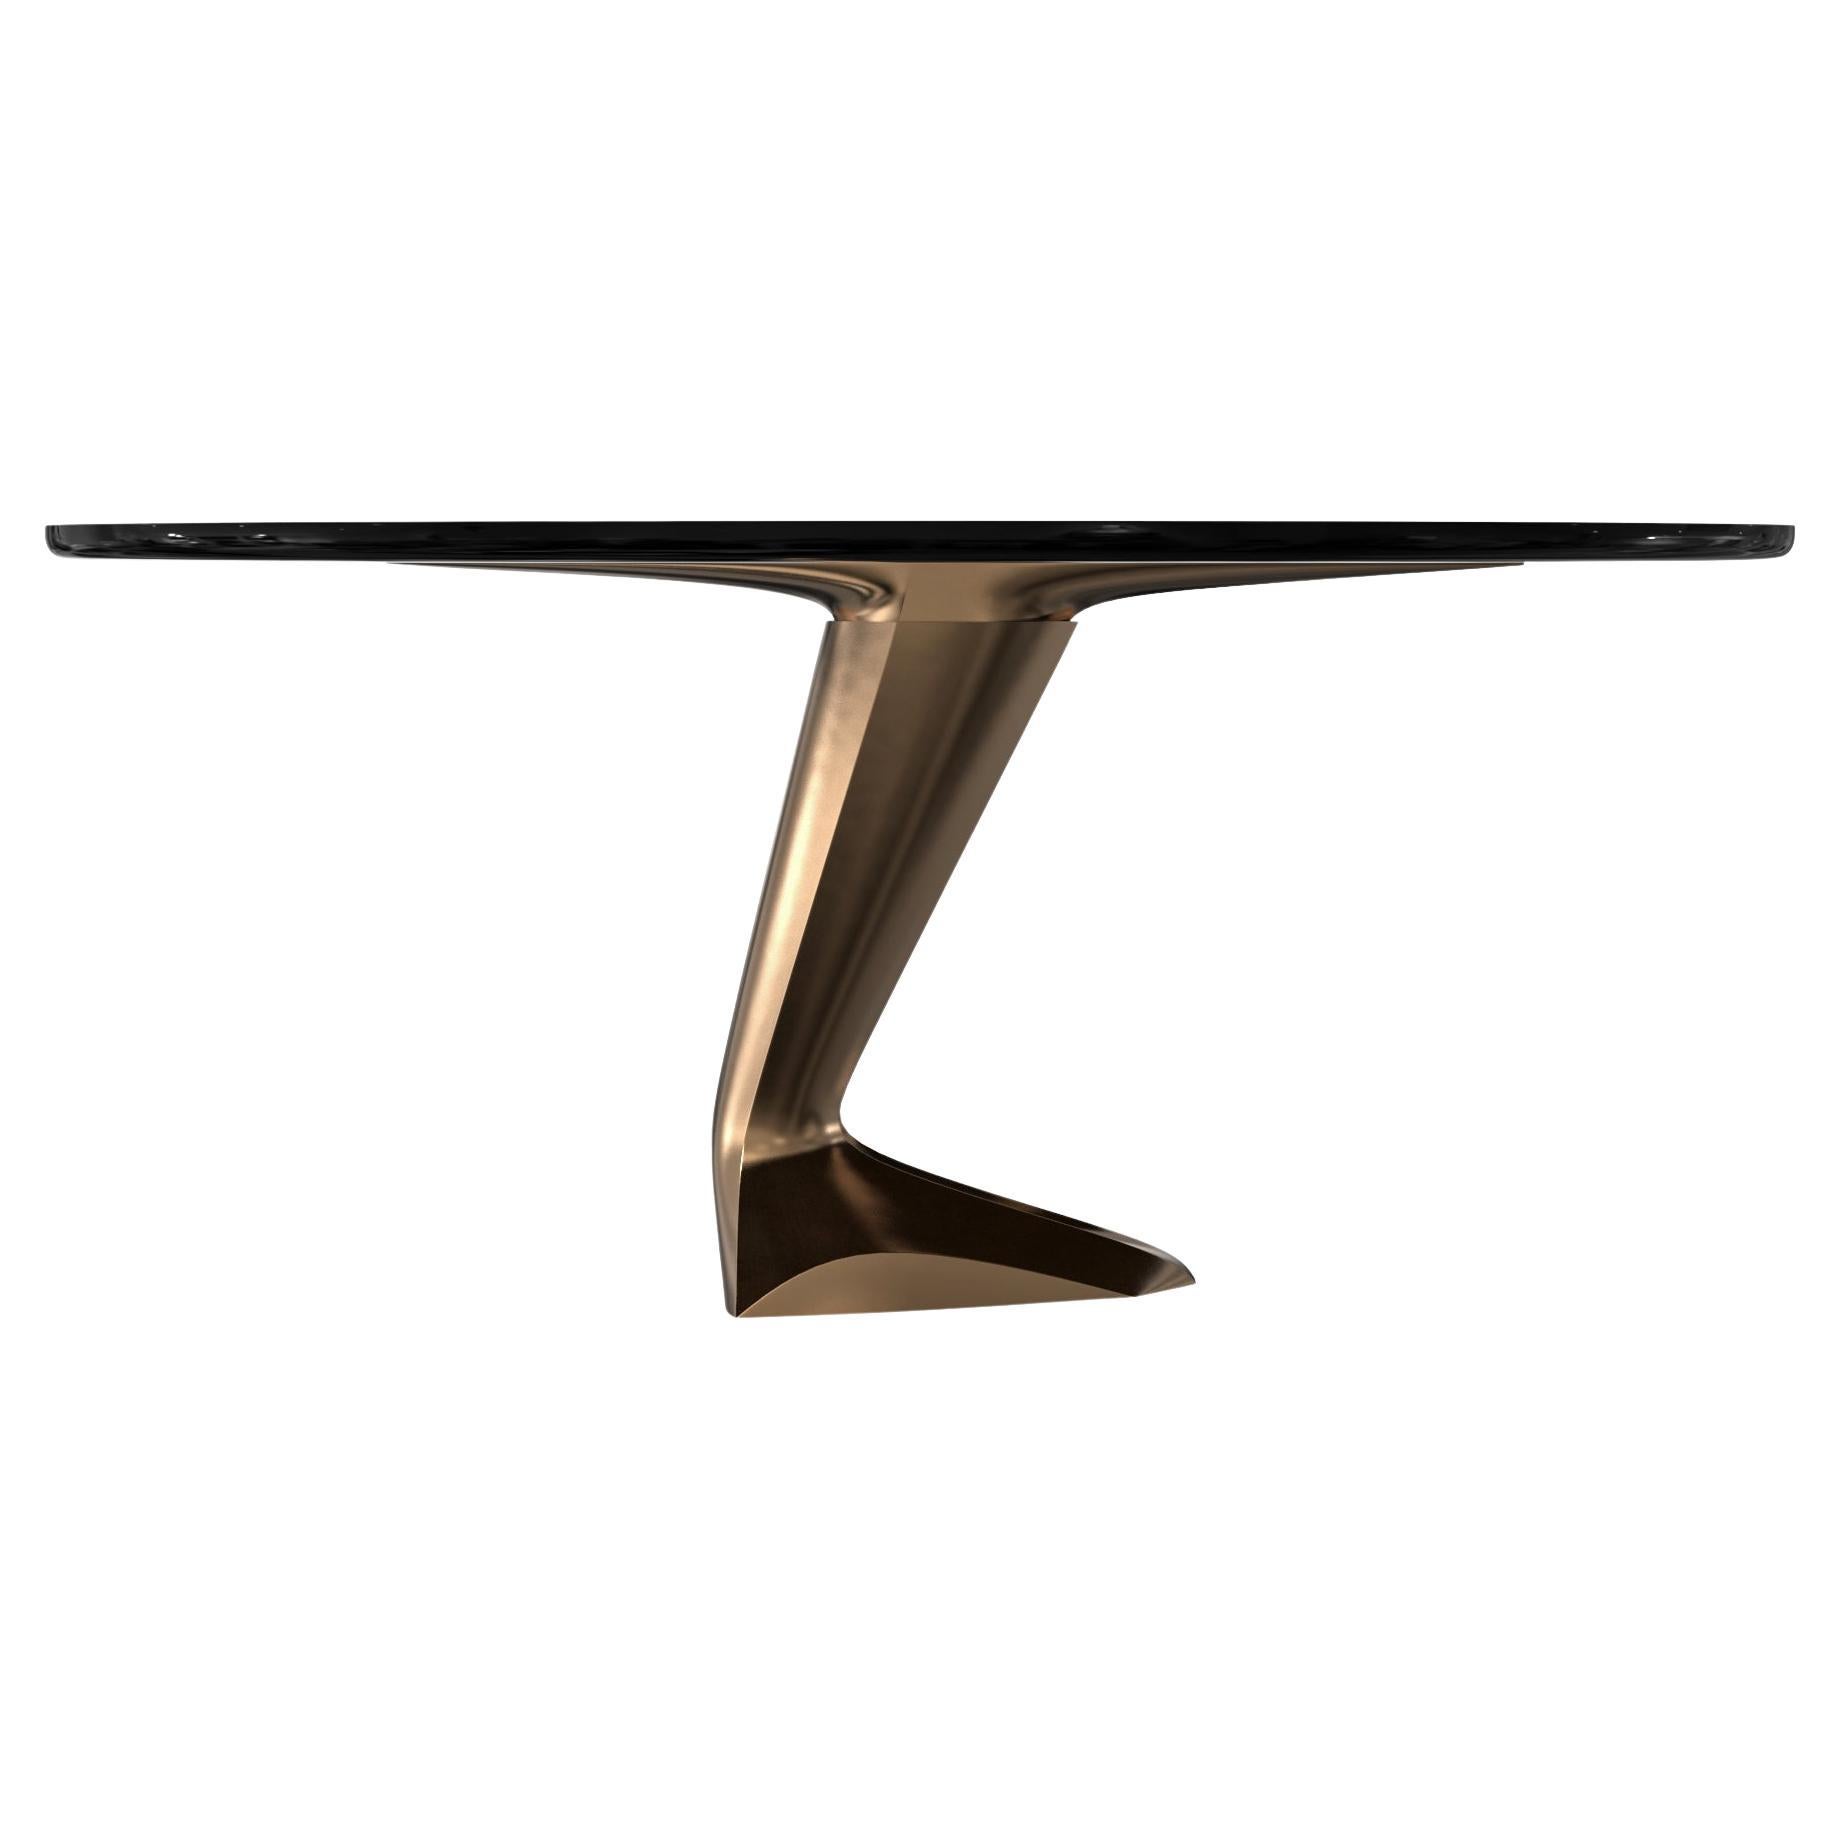 "Evoluzione" Limited Edition Table with Bronze and Stainless Steel, Istanbul